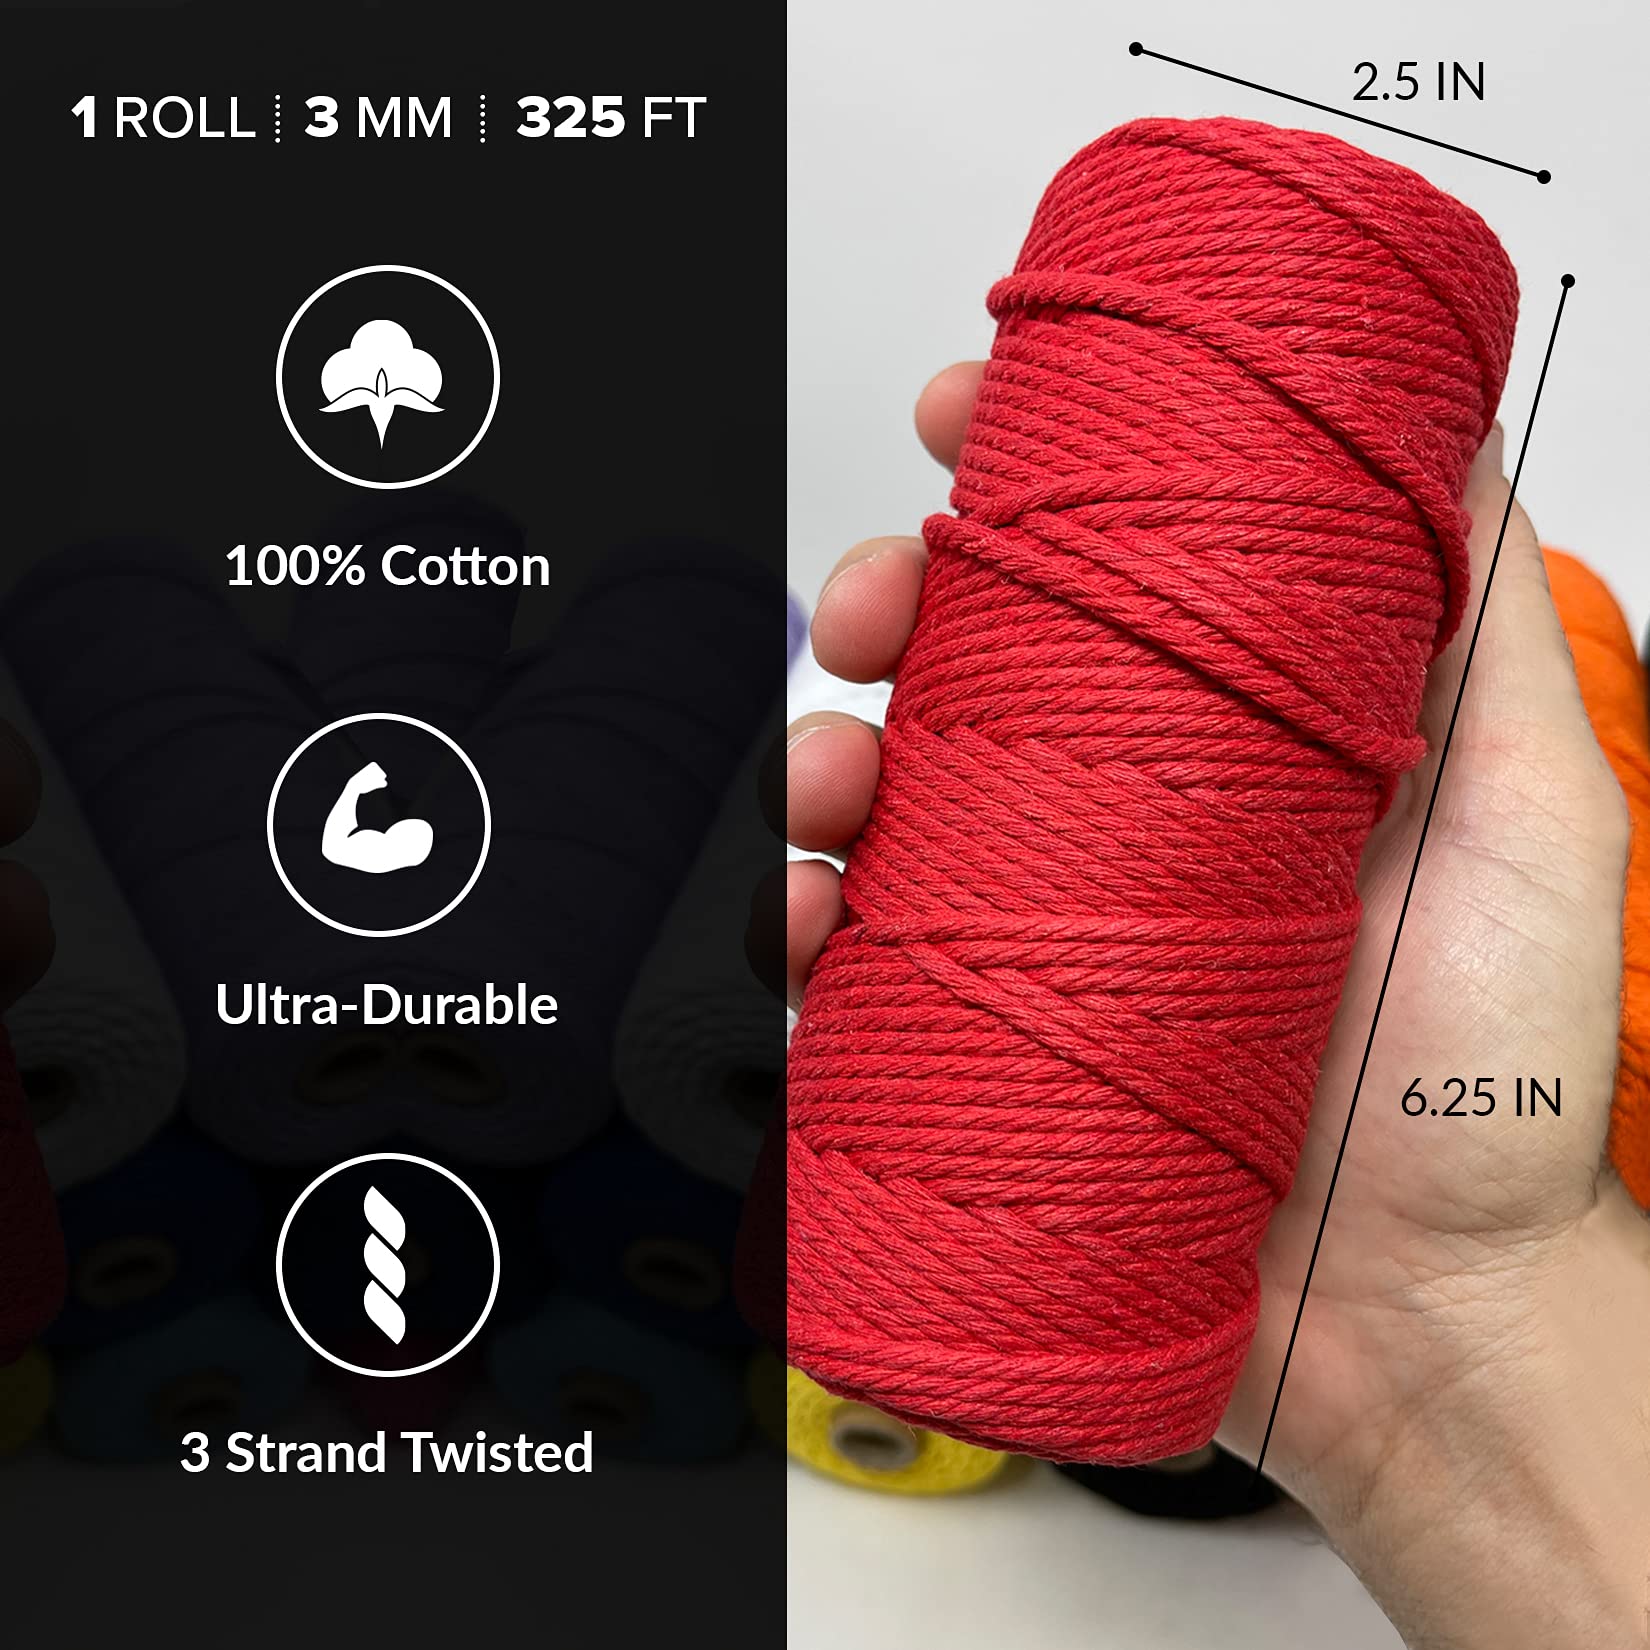 3mm Macrame Cord Cords for Macrame 100% Cotton Macrame Cord Rope for Macrame Natural in Colors and Colored Craft String Yarn Supplies and Materials 325 Feet Cotton Rope  - Like New